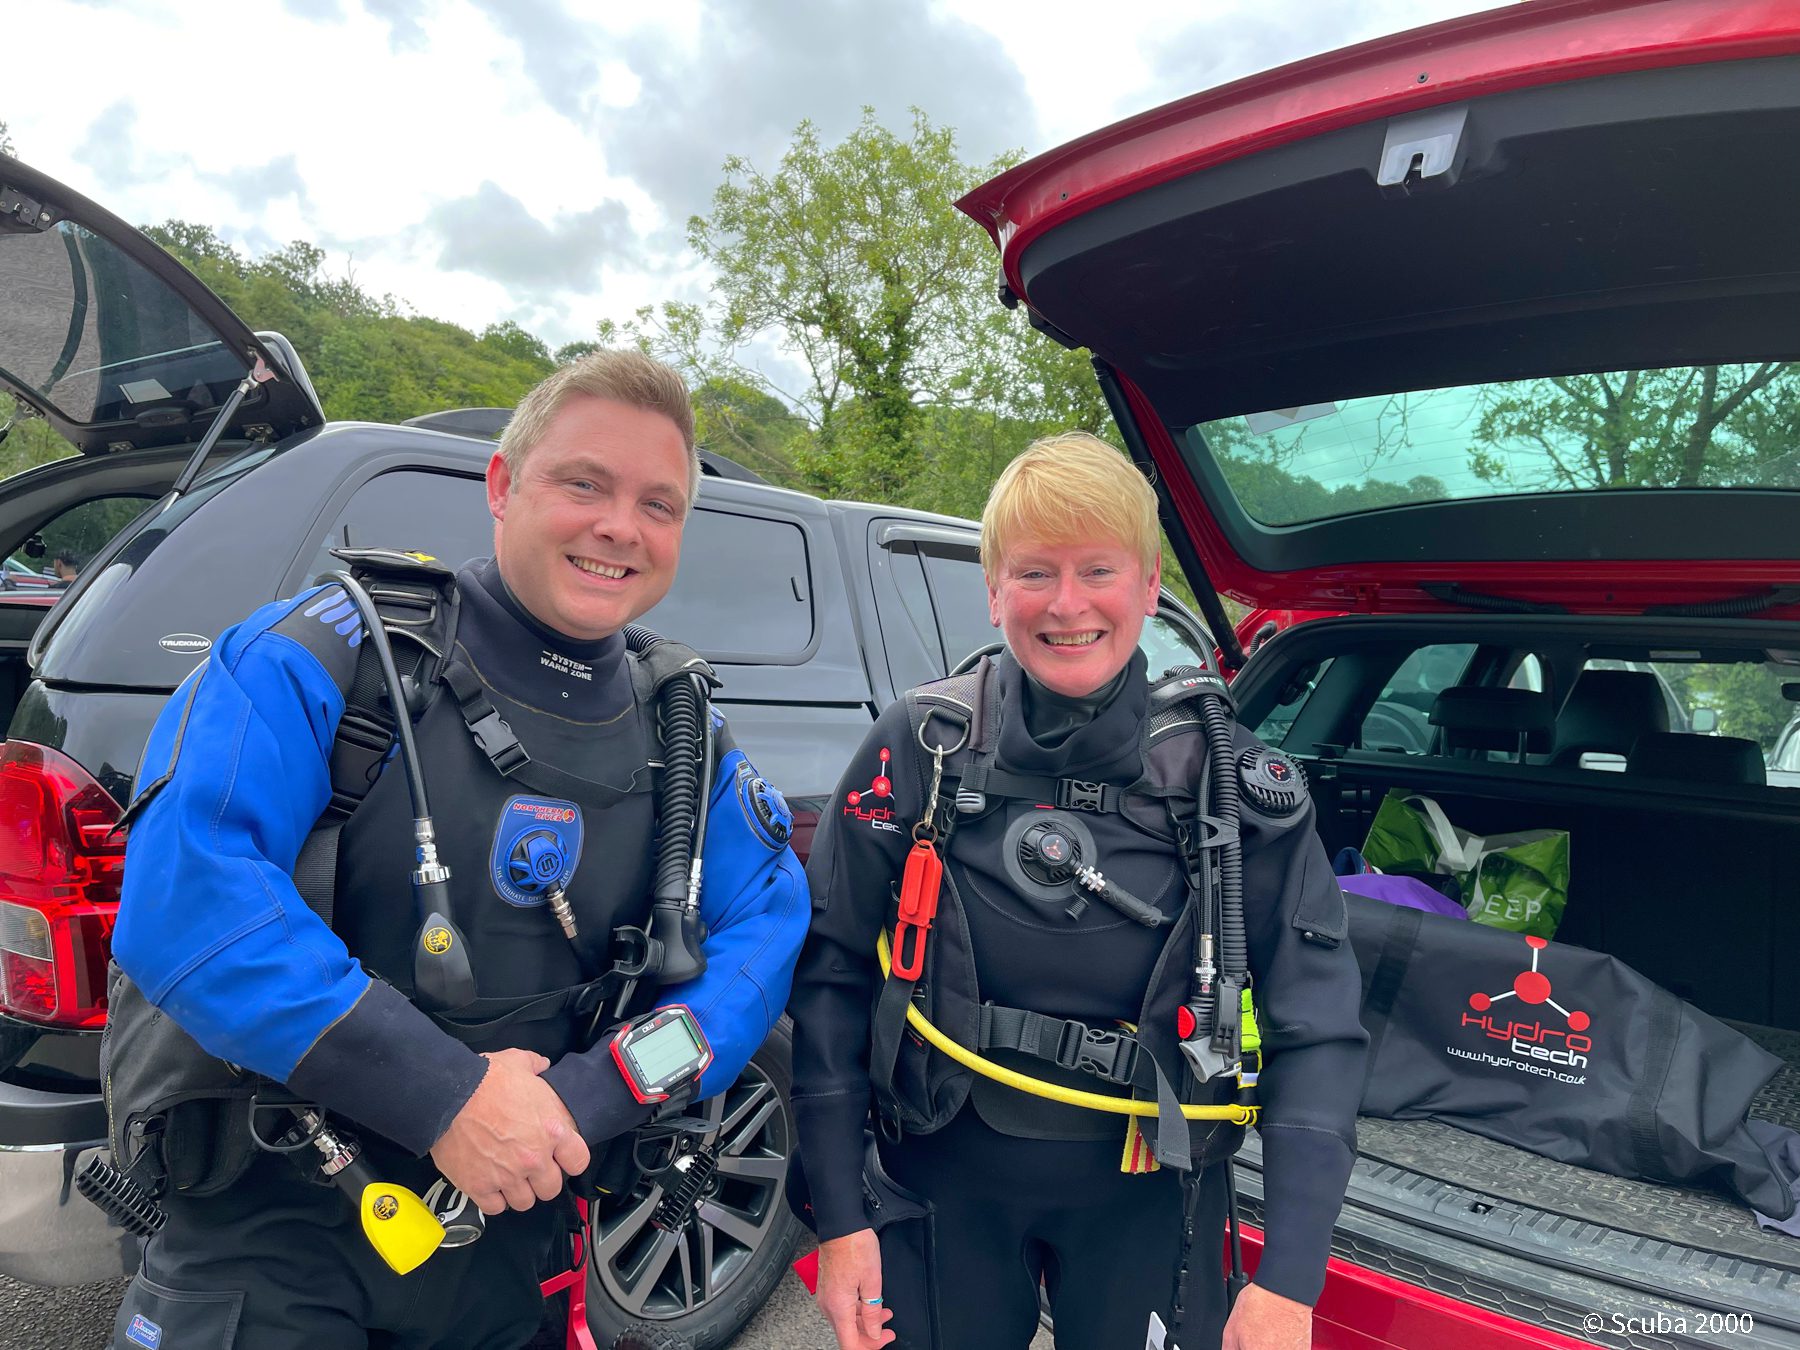 Come and dive with us at Stoney Cove near Leicester, UK